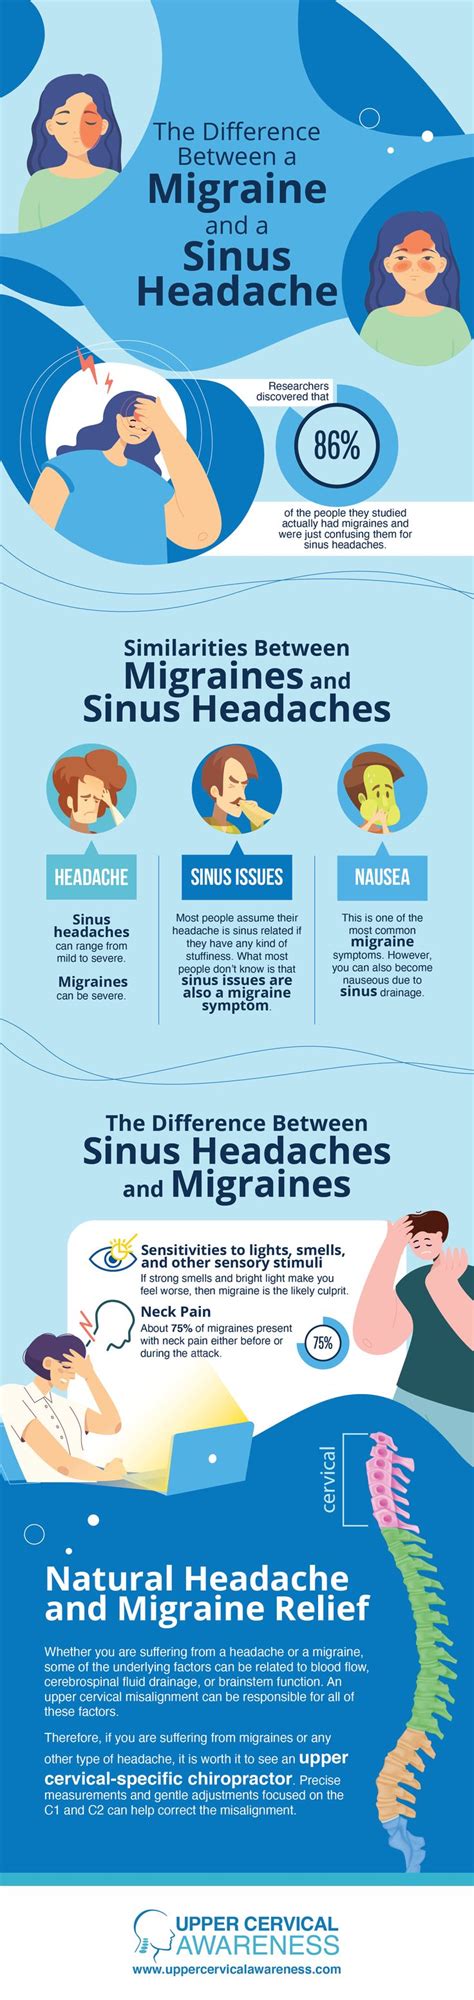 Understanding The Difference Between A Migraine And A Sinus Headache